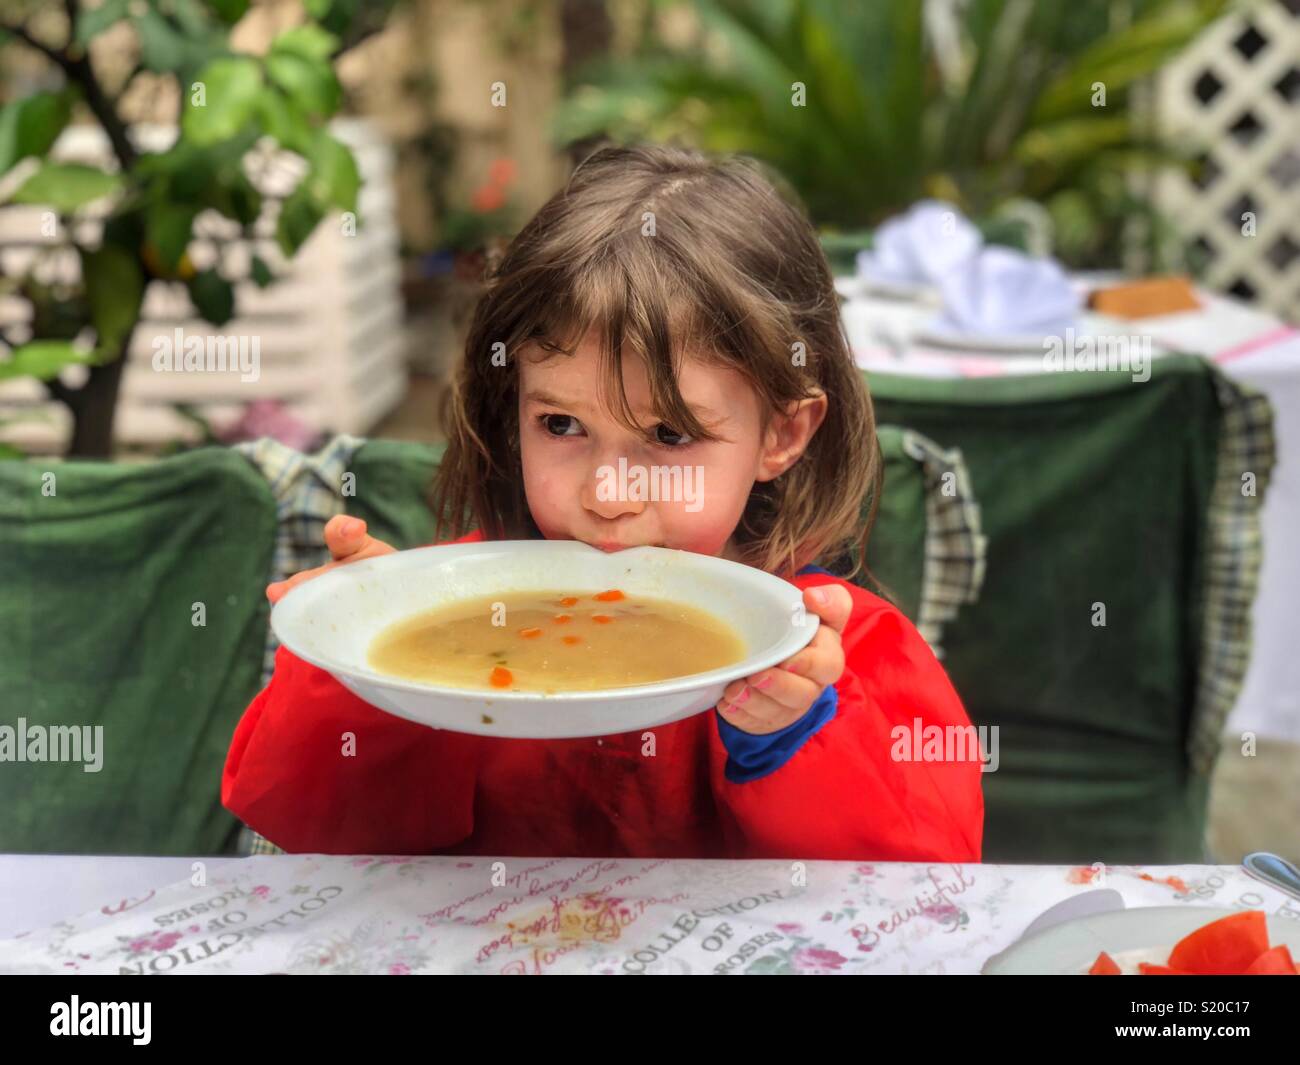 Cute little girl eating a soup Stock Photo